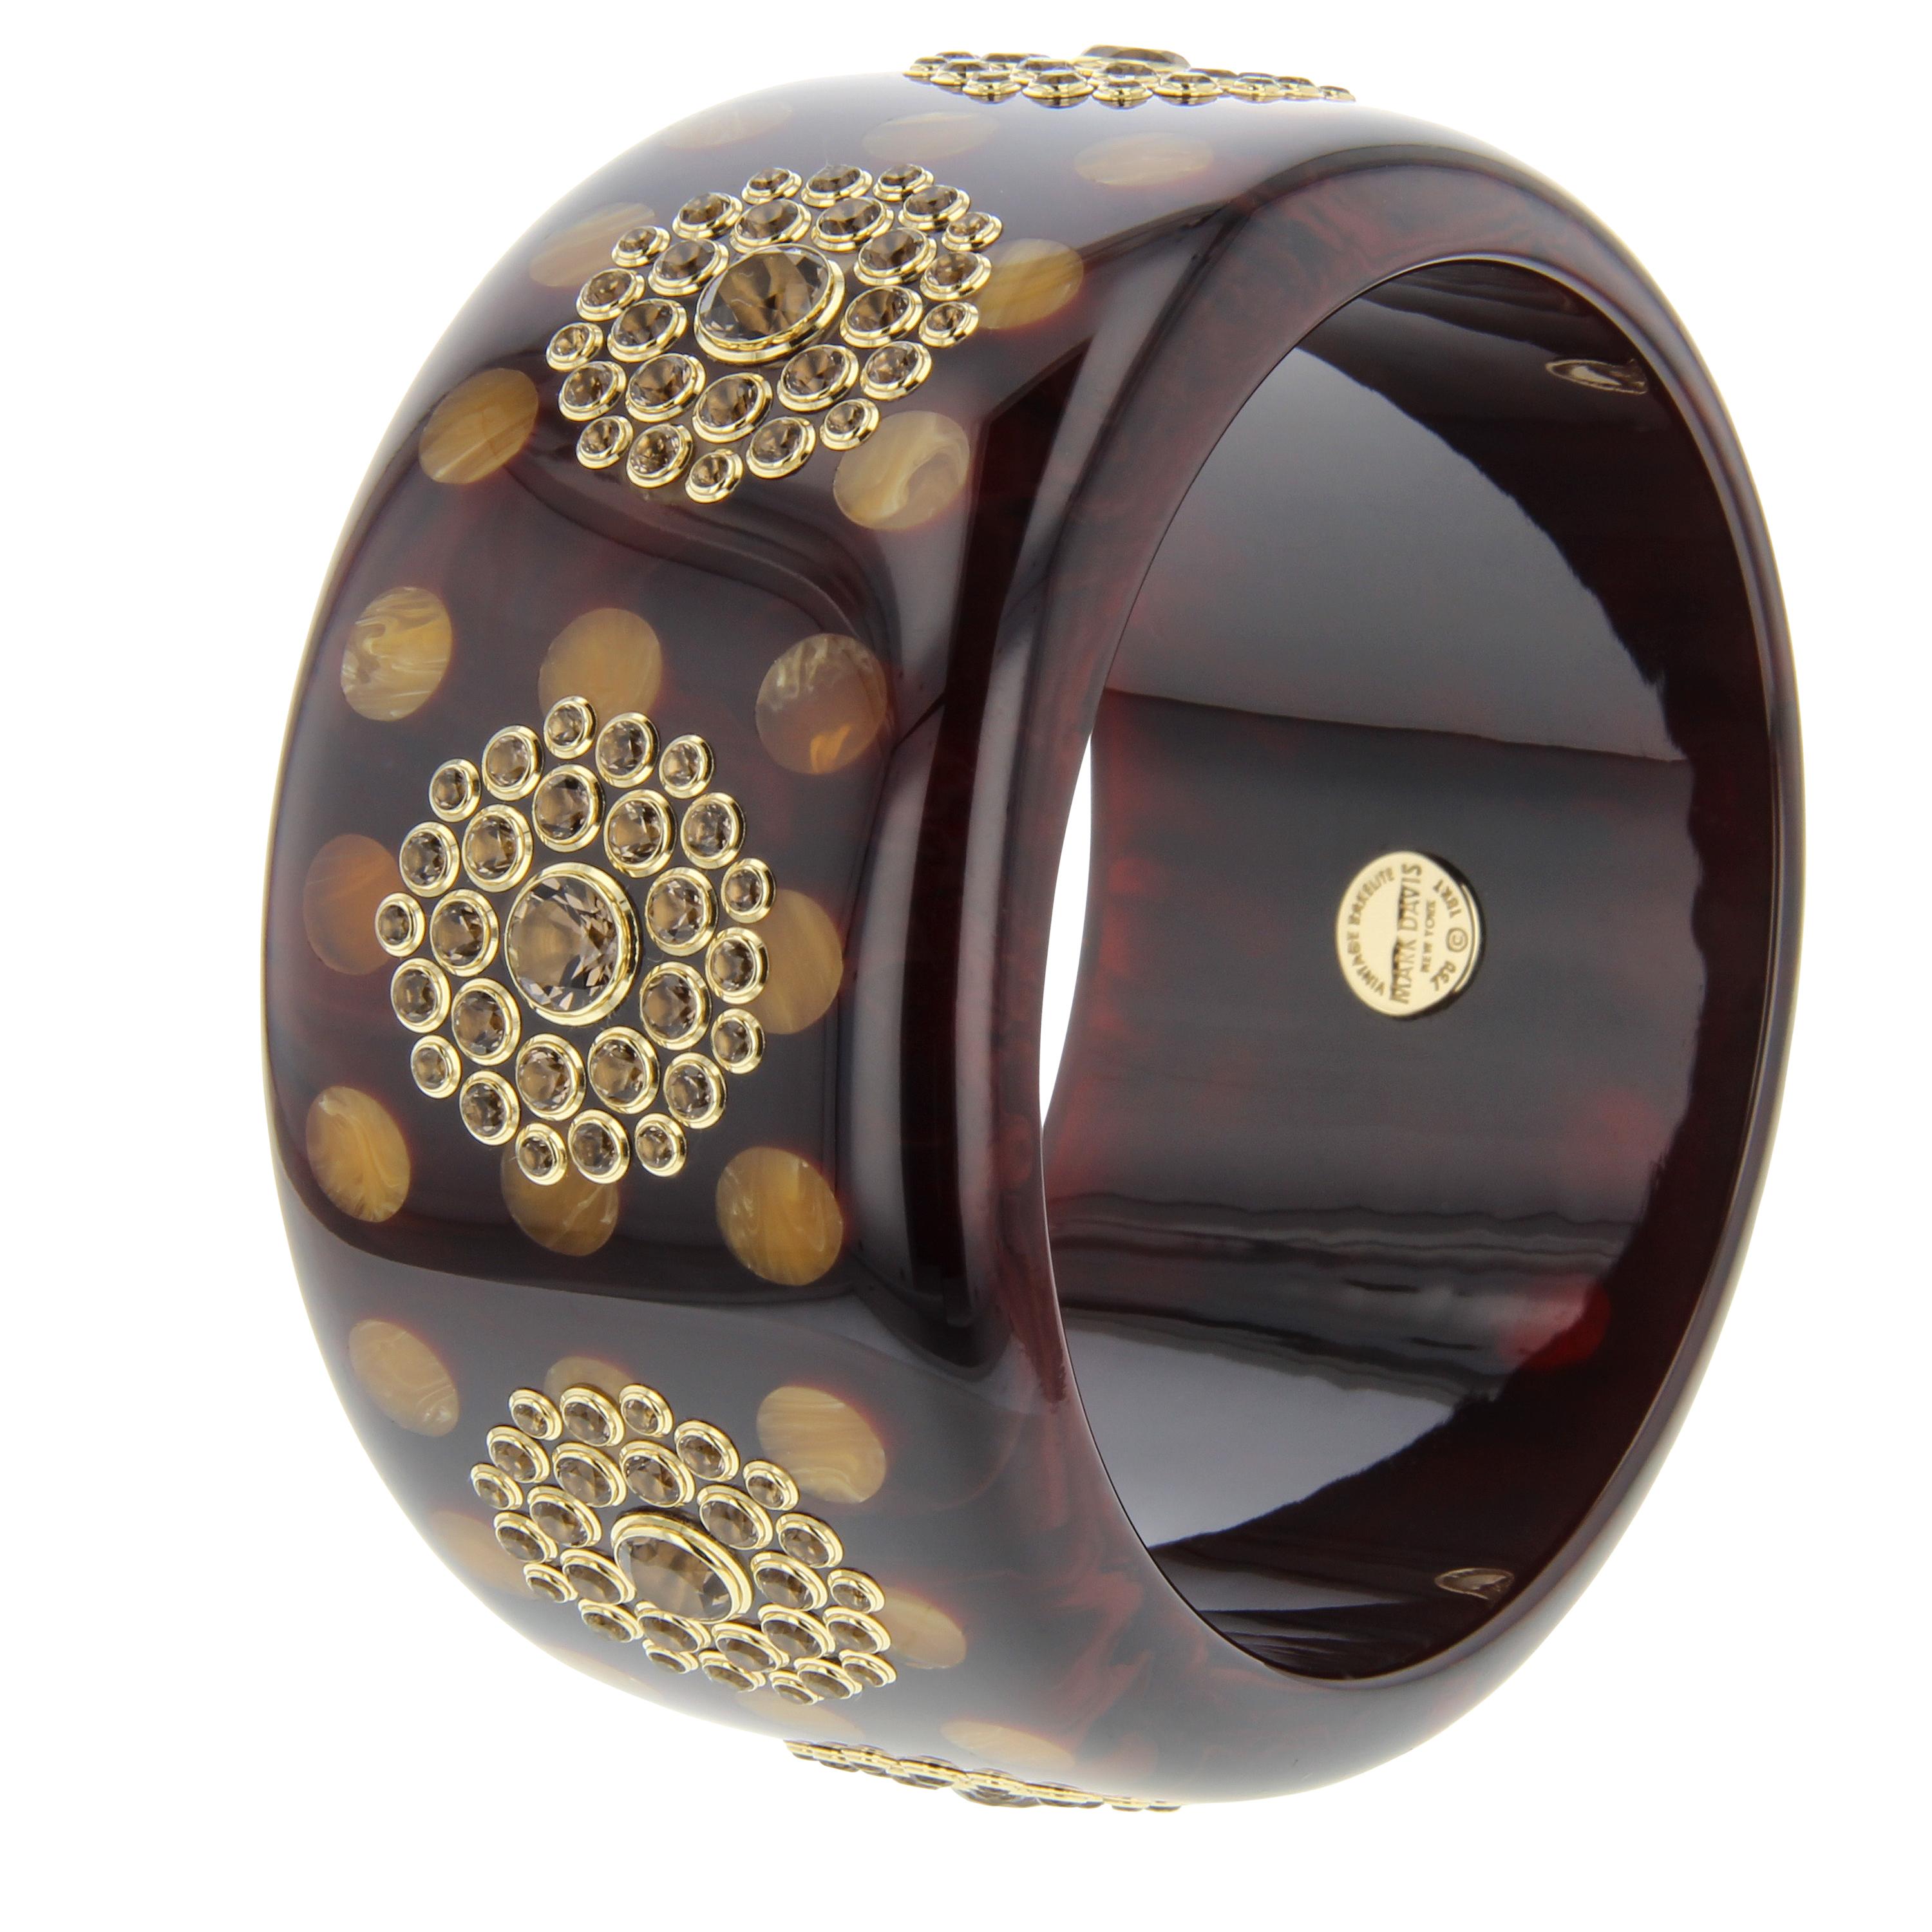 This very special Mark Davis bangle was created with a deep, rich, brown, vintage bakelite inlaid with orange bakelite polka dots. The piece was then set with smoky quartz of varying sizes arranged in tight clusters around the circumference of the